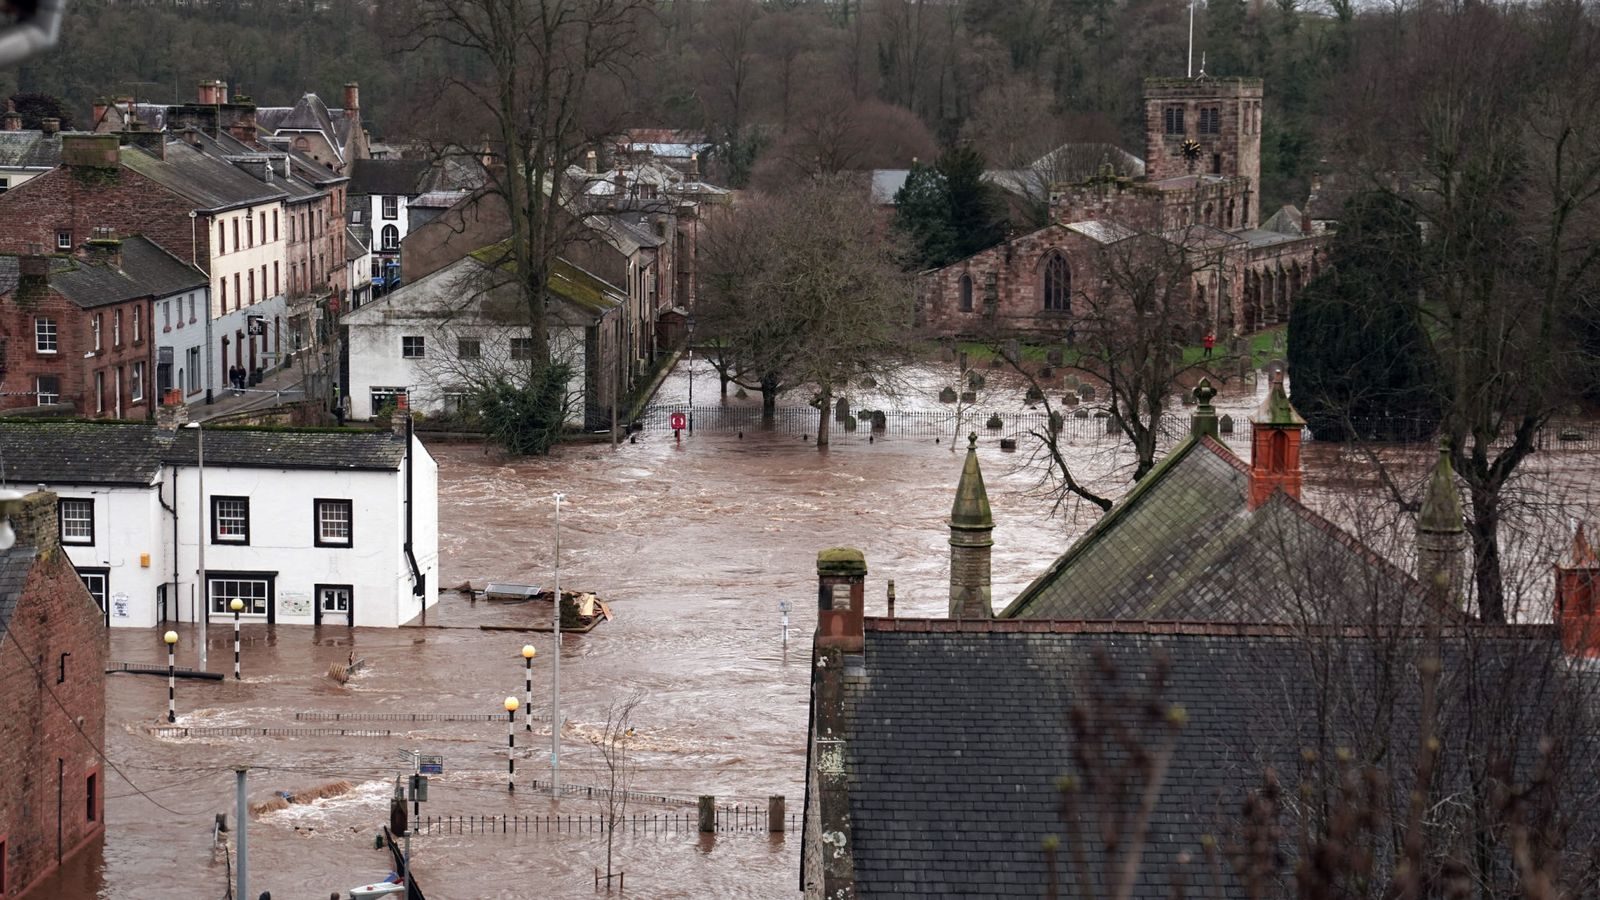 Flooded streets in Appleby-in-Westmorland, Cumbria, in the wake of Storm Ciara